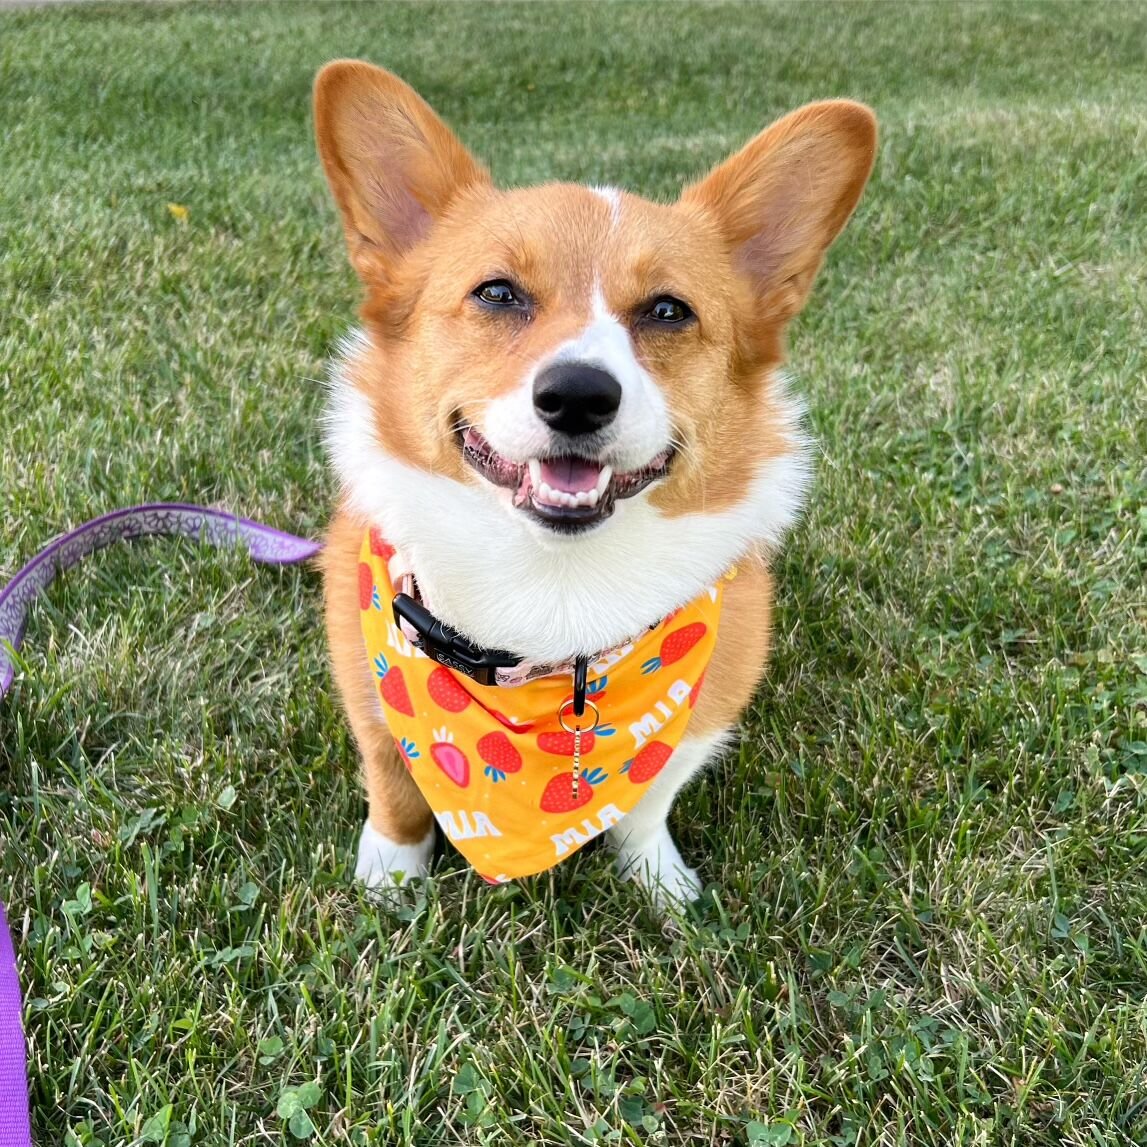 'We'll see who's the bravest': Eight corgis to race in Bills' Corgi Cup ...